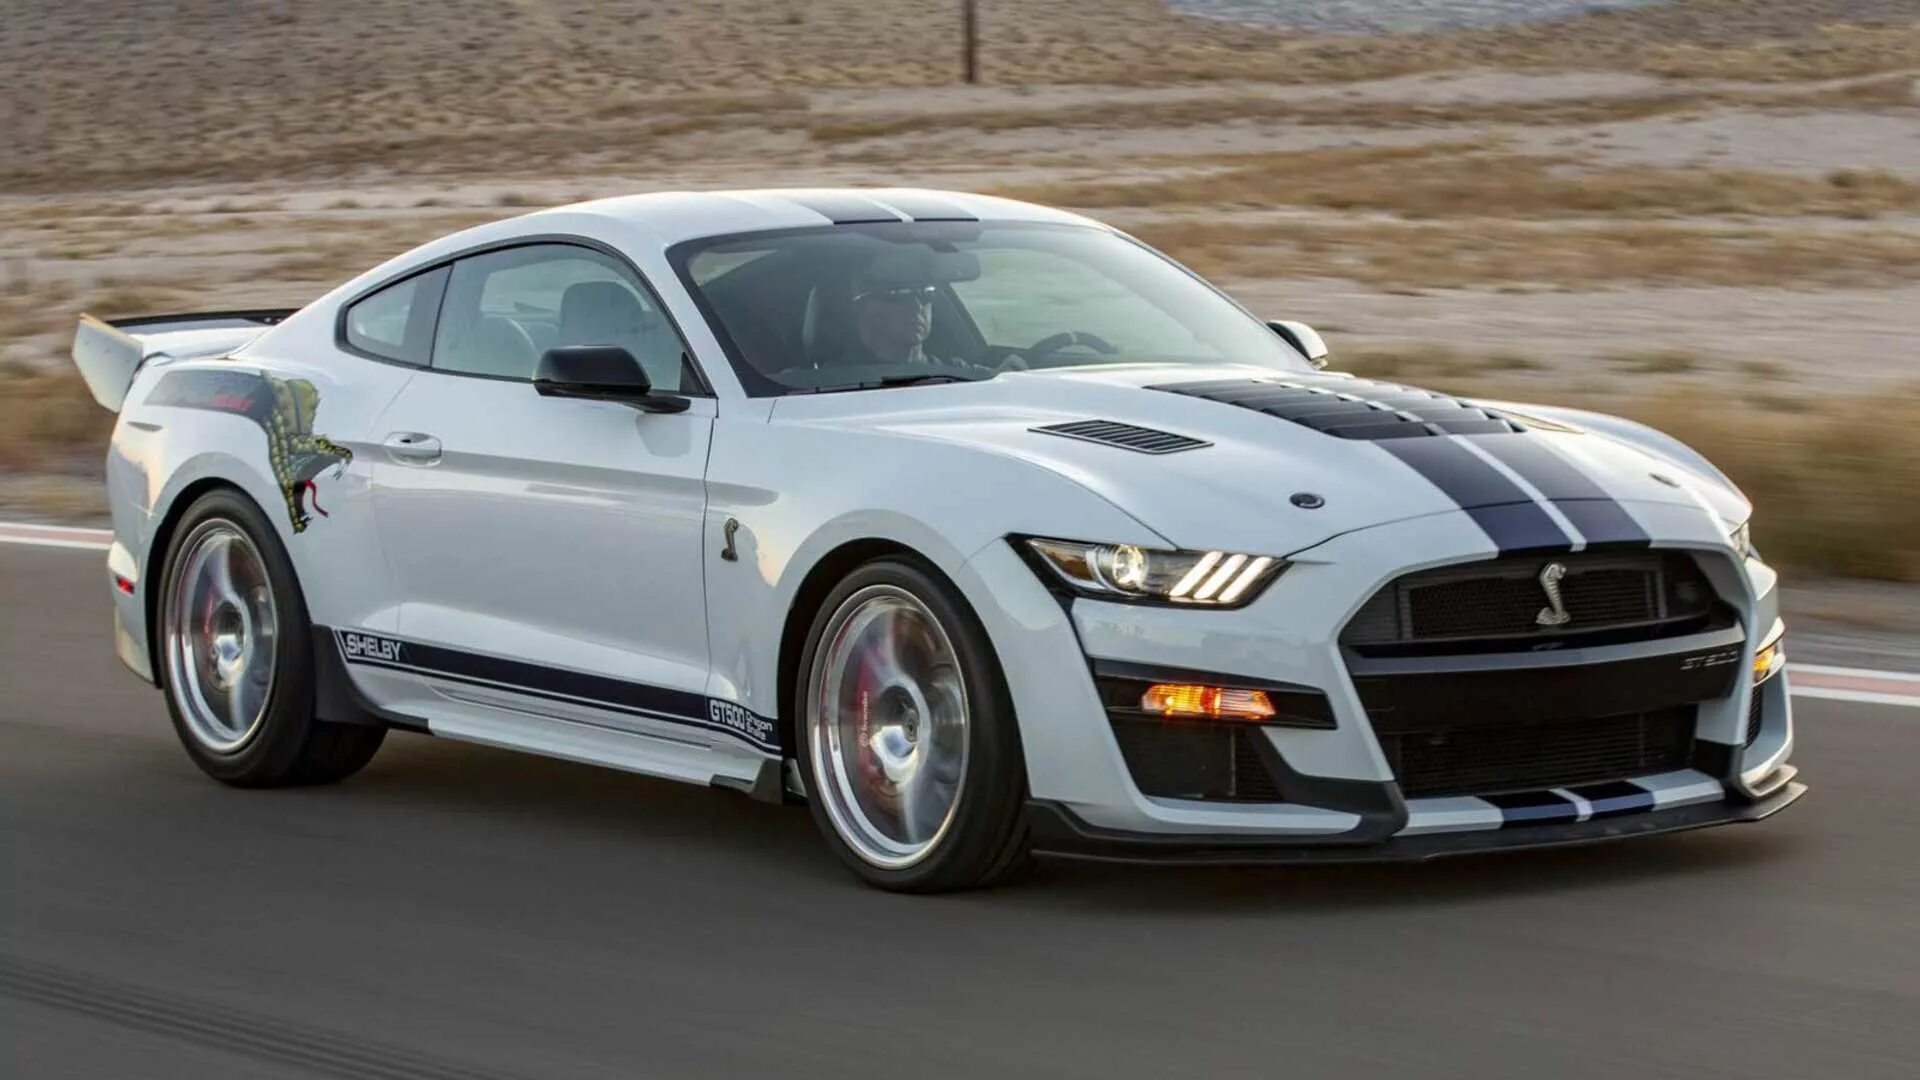 Mustang shelby gt. Форд Мустанг ГТ 500. Форд Мустанг ГТ 500 Шелби. Форд Мустанг Шелби gt 500 2020. Форд Мустанг 2021 Shelby gt500.